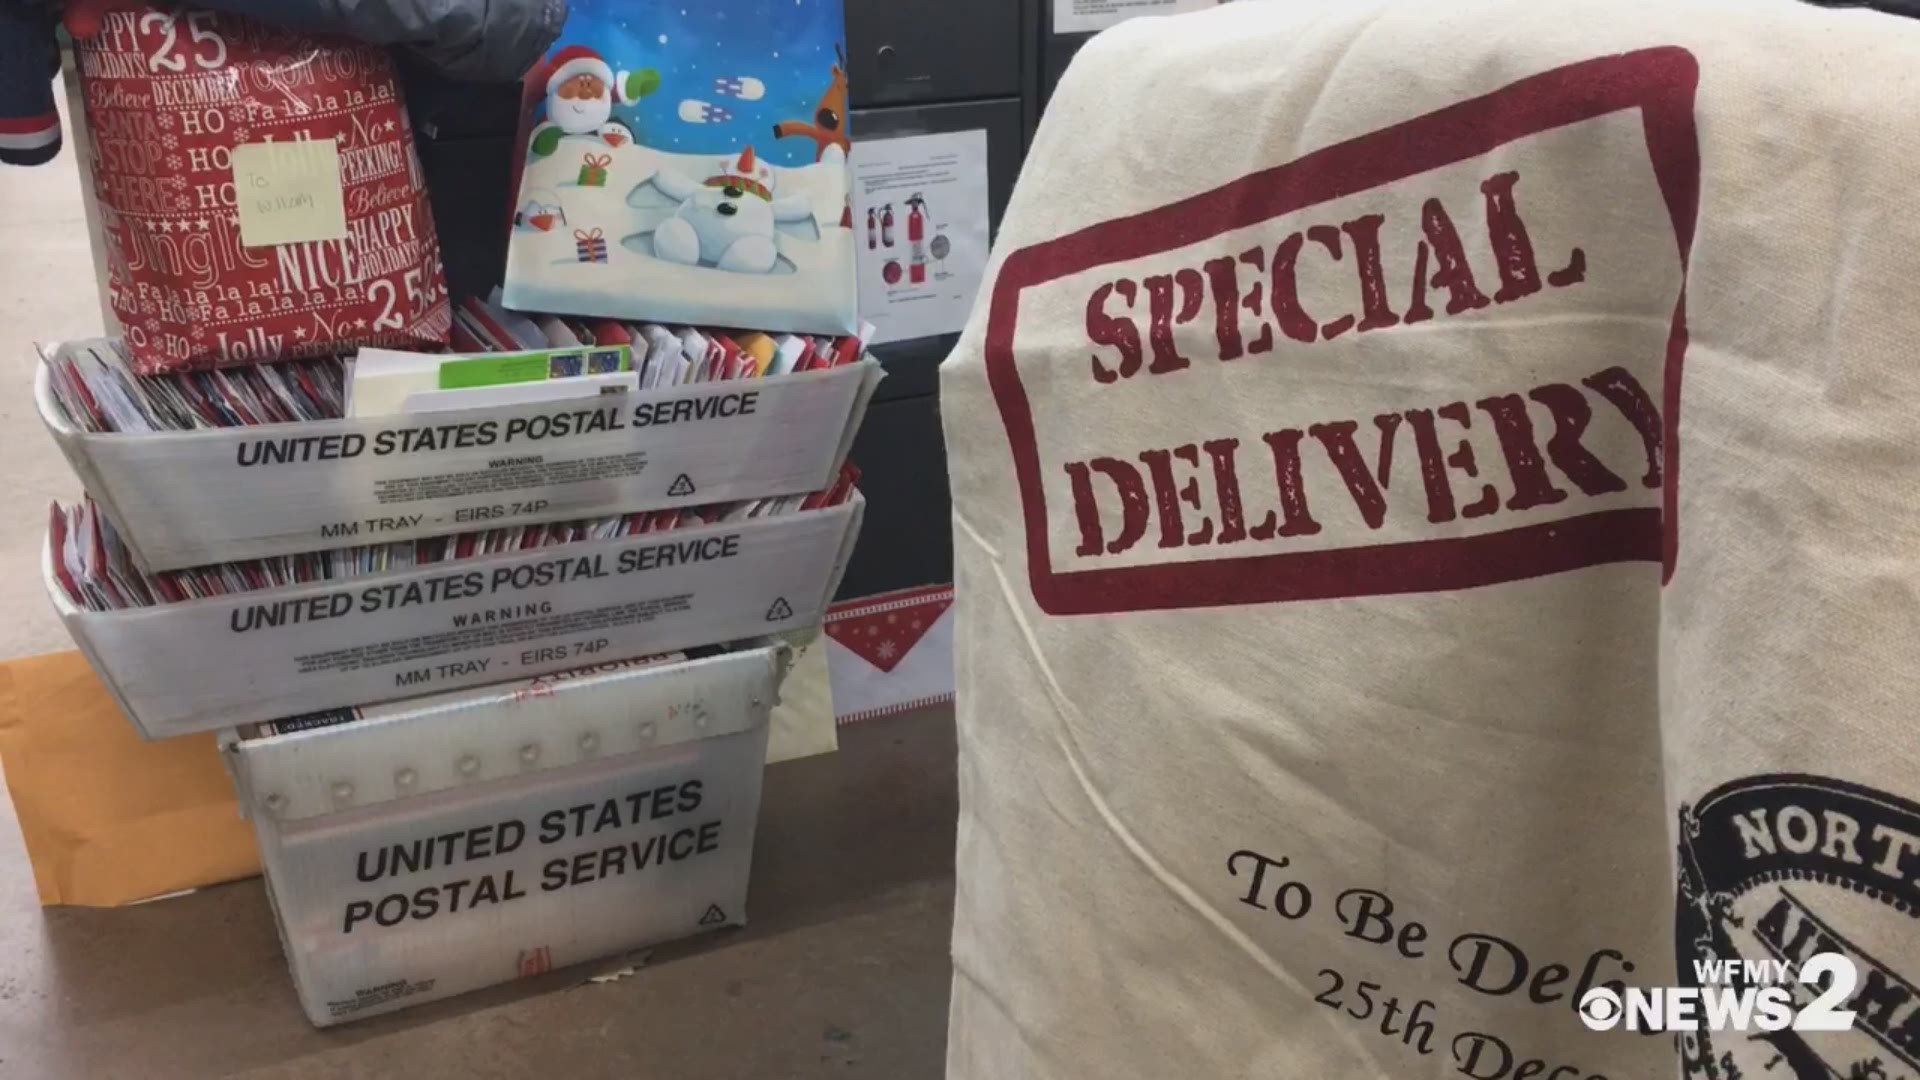 Here comes a special delivery for 9-year-old William Sidebottom who just wants Christmas cards!